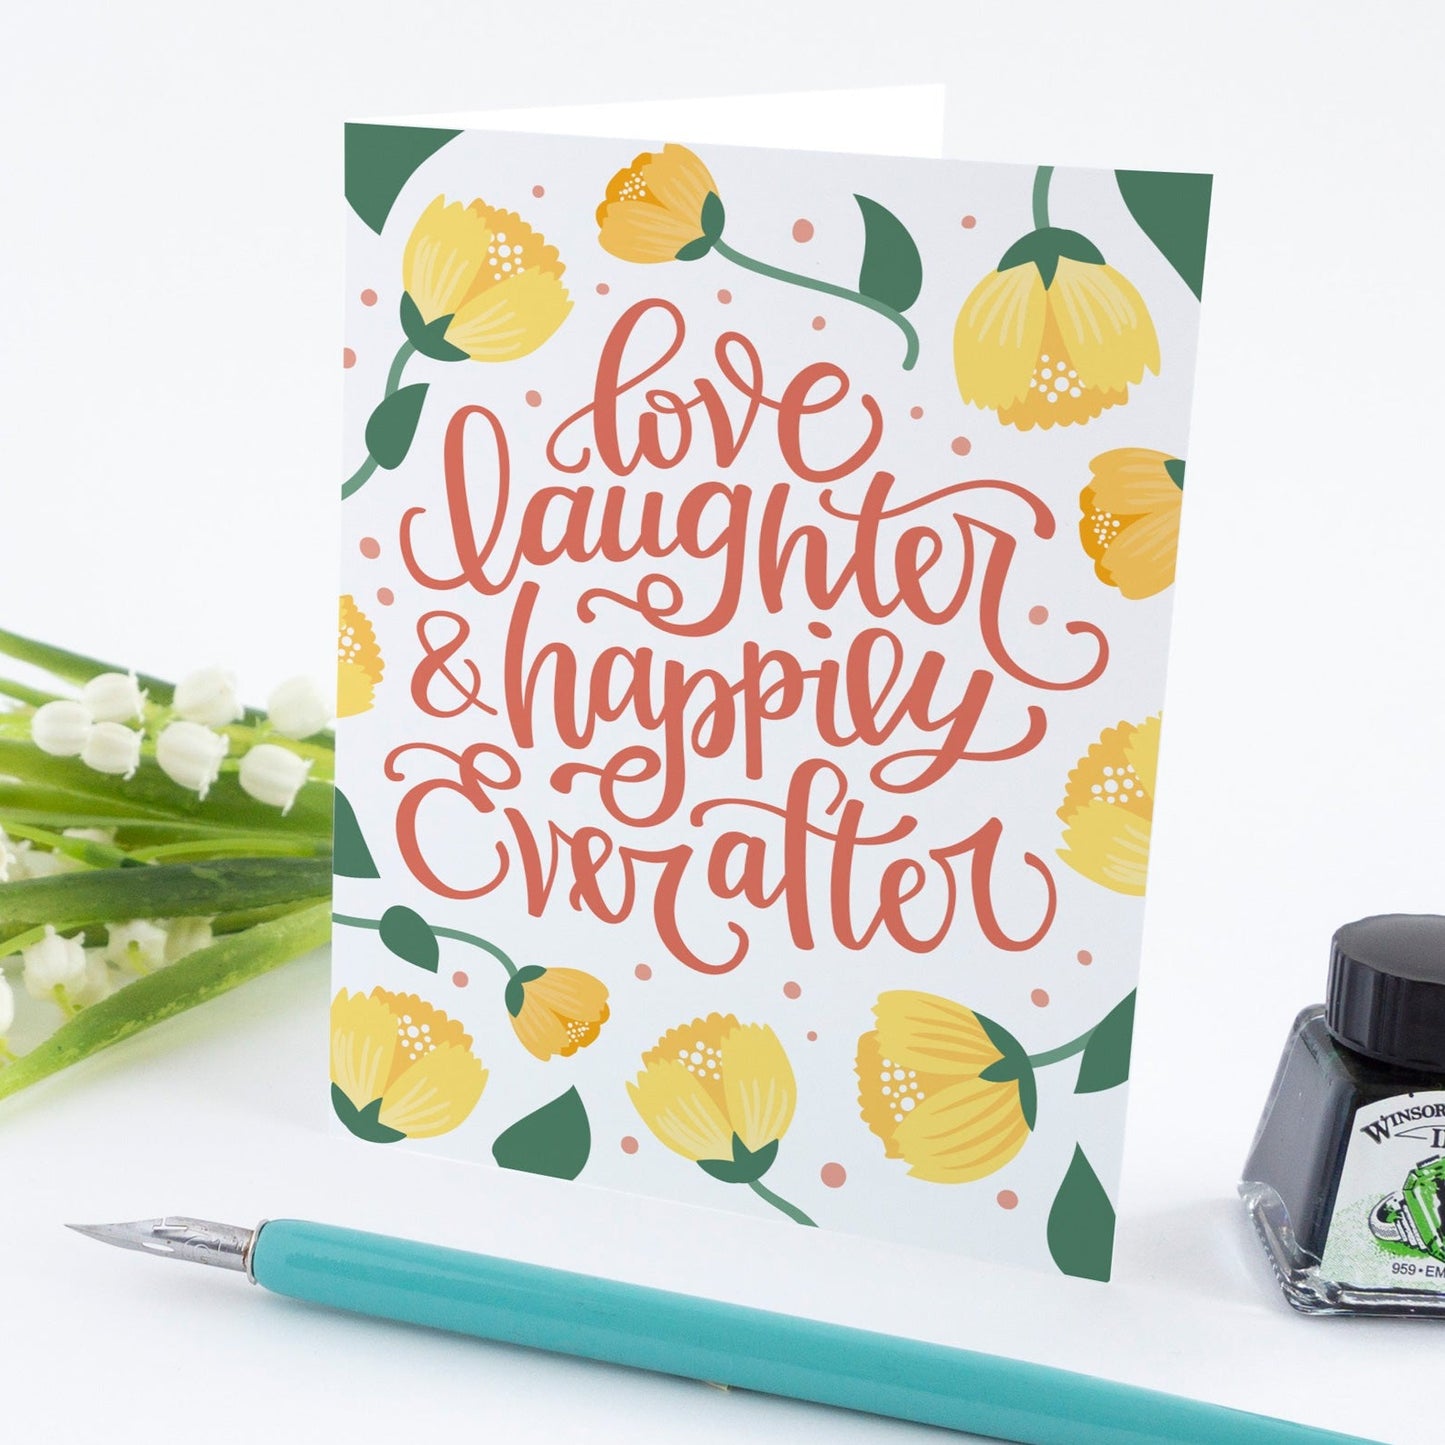 Love laughter & happily ever after Wedding Card